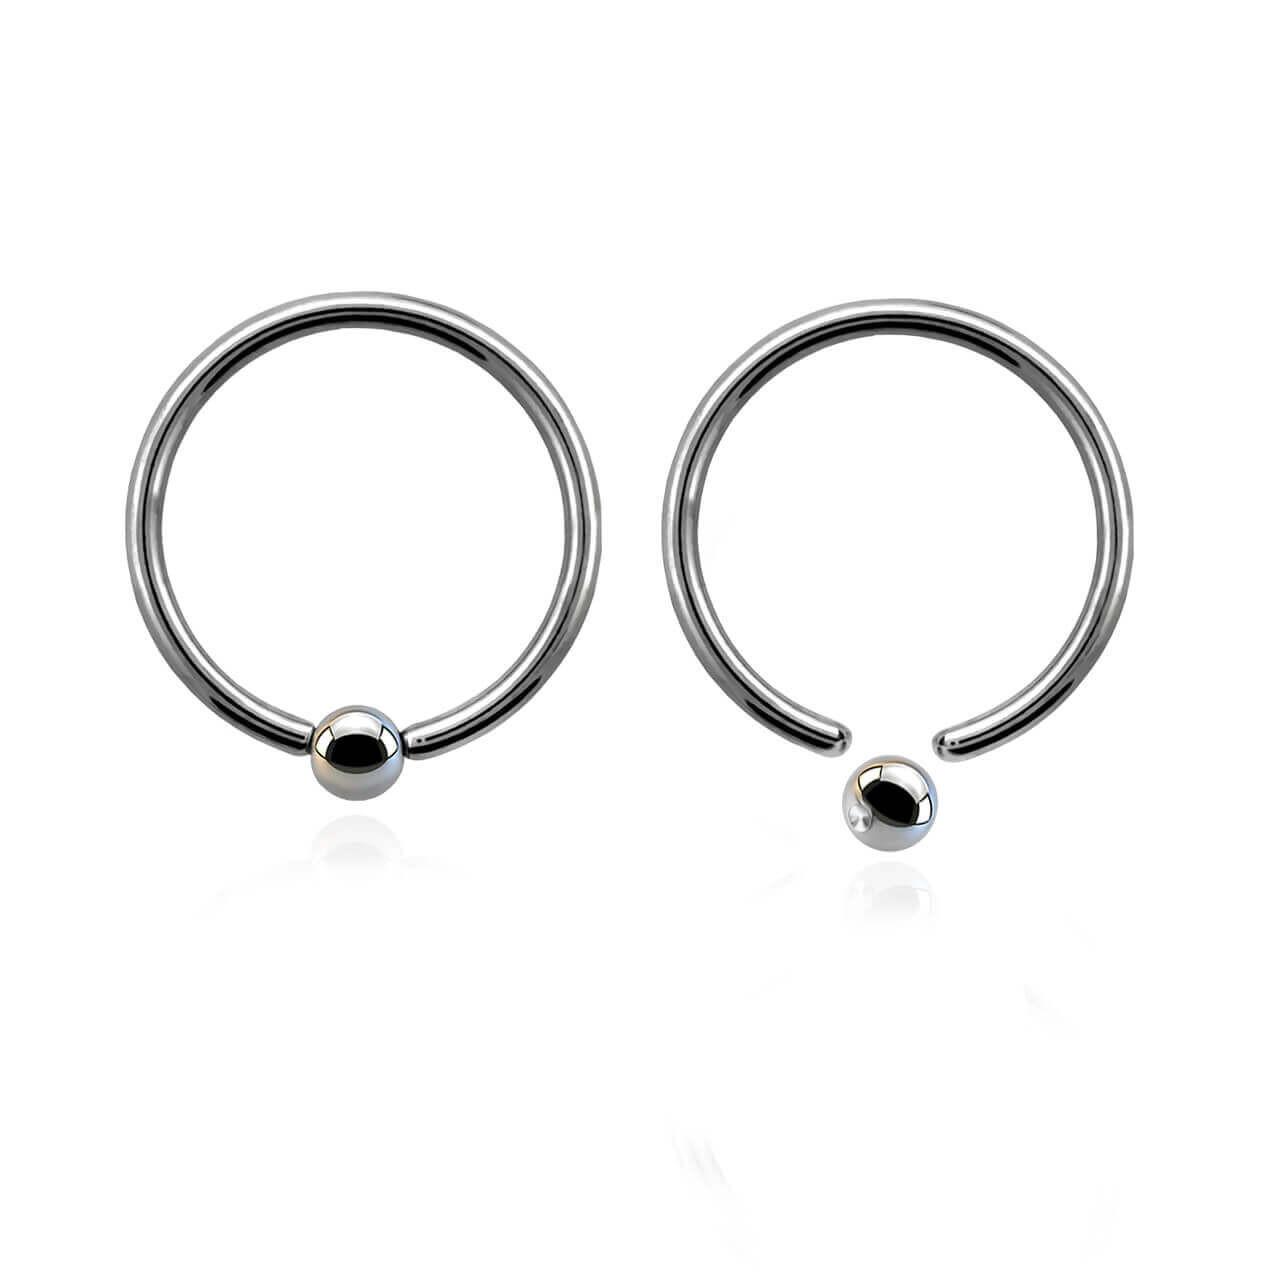 SBC1B25 Wholesale Pack of 25 Surgical steel ball closure rings, Thickness 1mm, Ball size 2.5mm